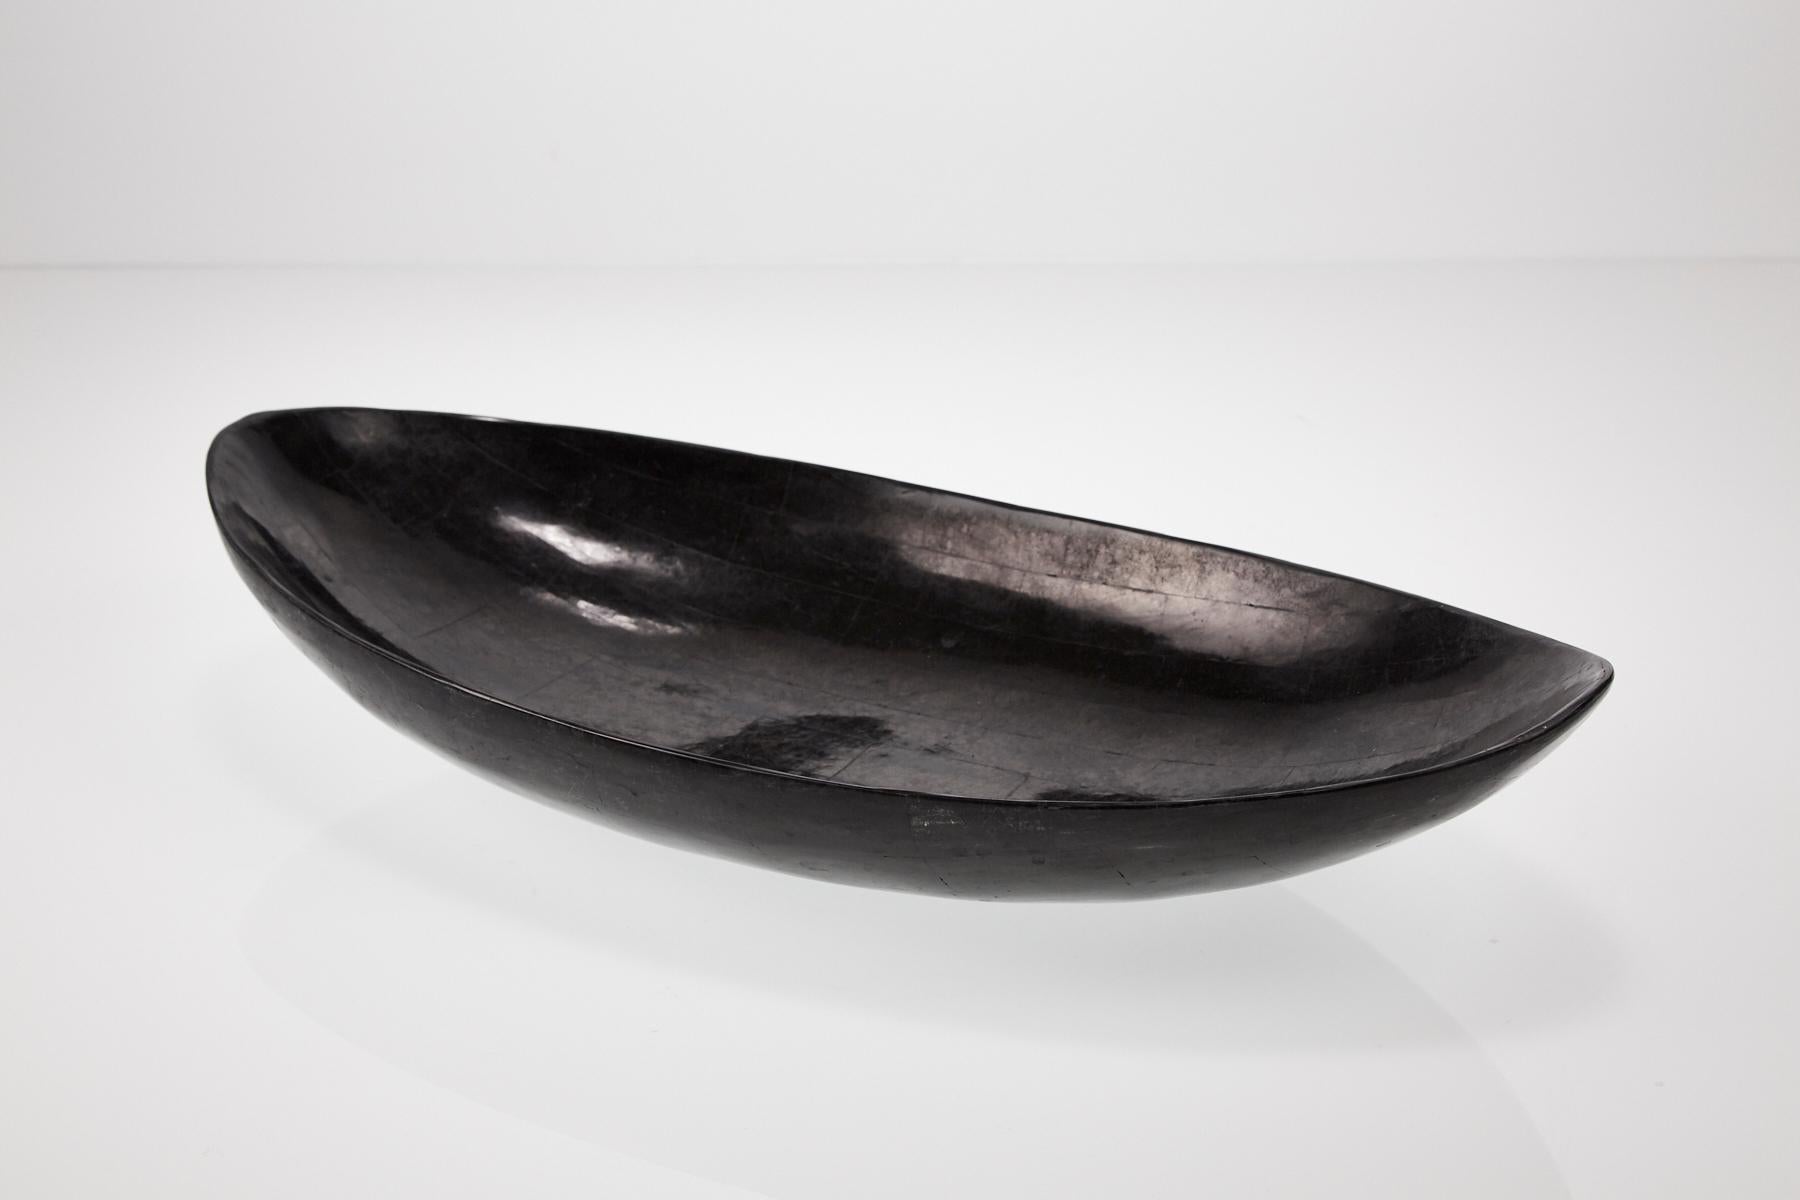 Inlay Postmodern Black Tessellated Stone Oval Decorative Bowl or Platter, 1990s For Sale